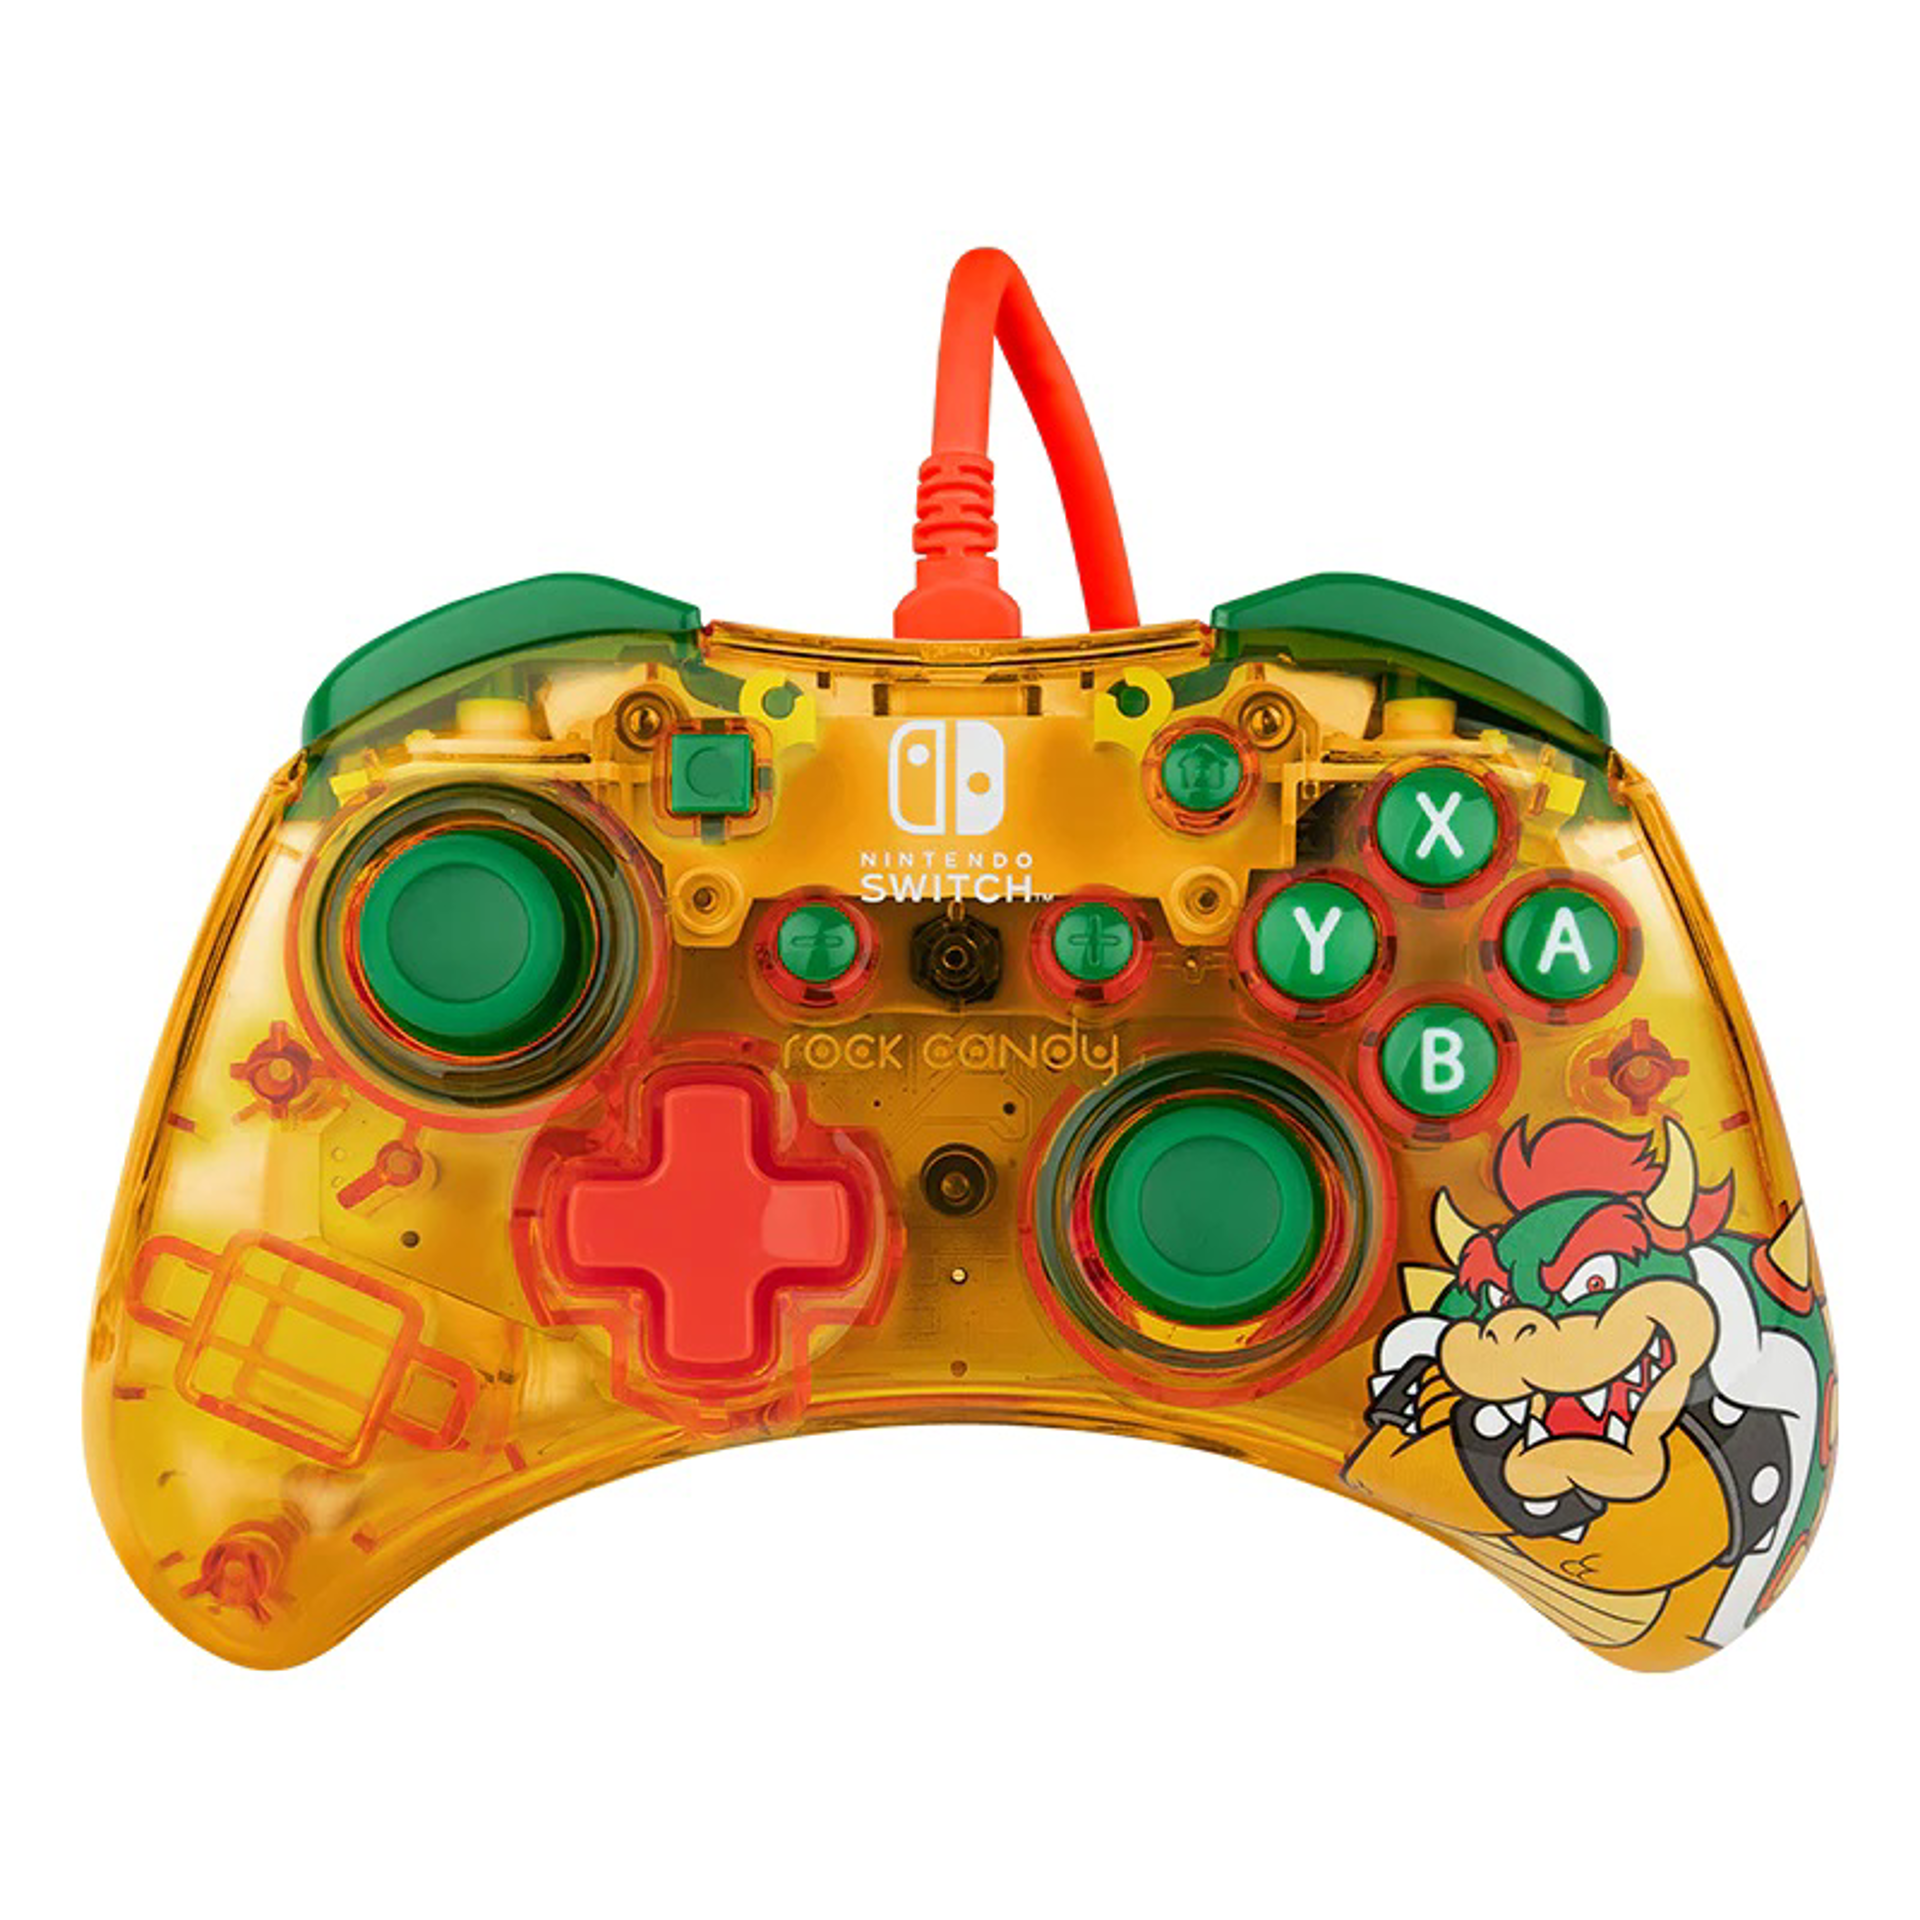 PDP - Manette filaire Rock Candy Bowser pour Nintendo Switch et Switch